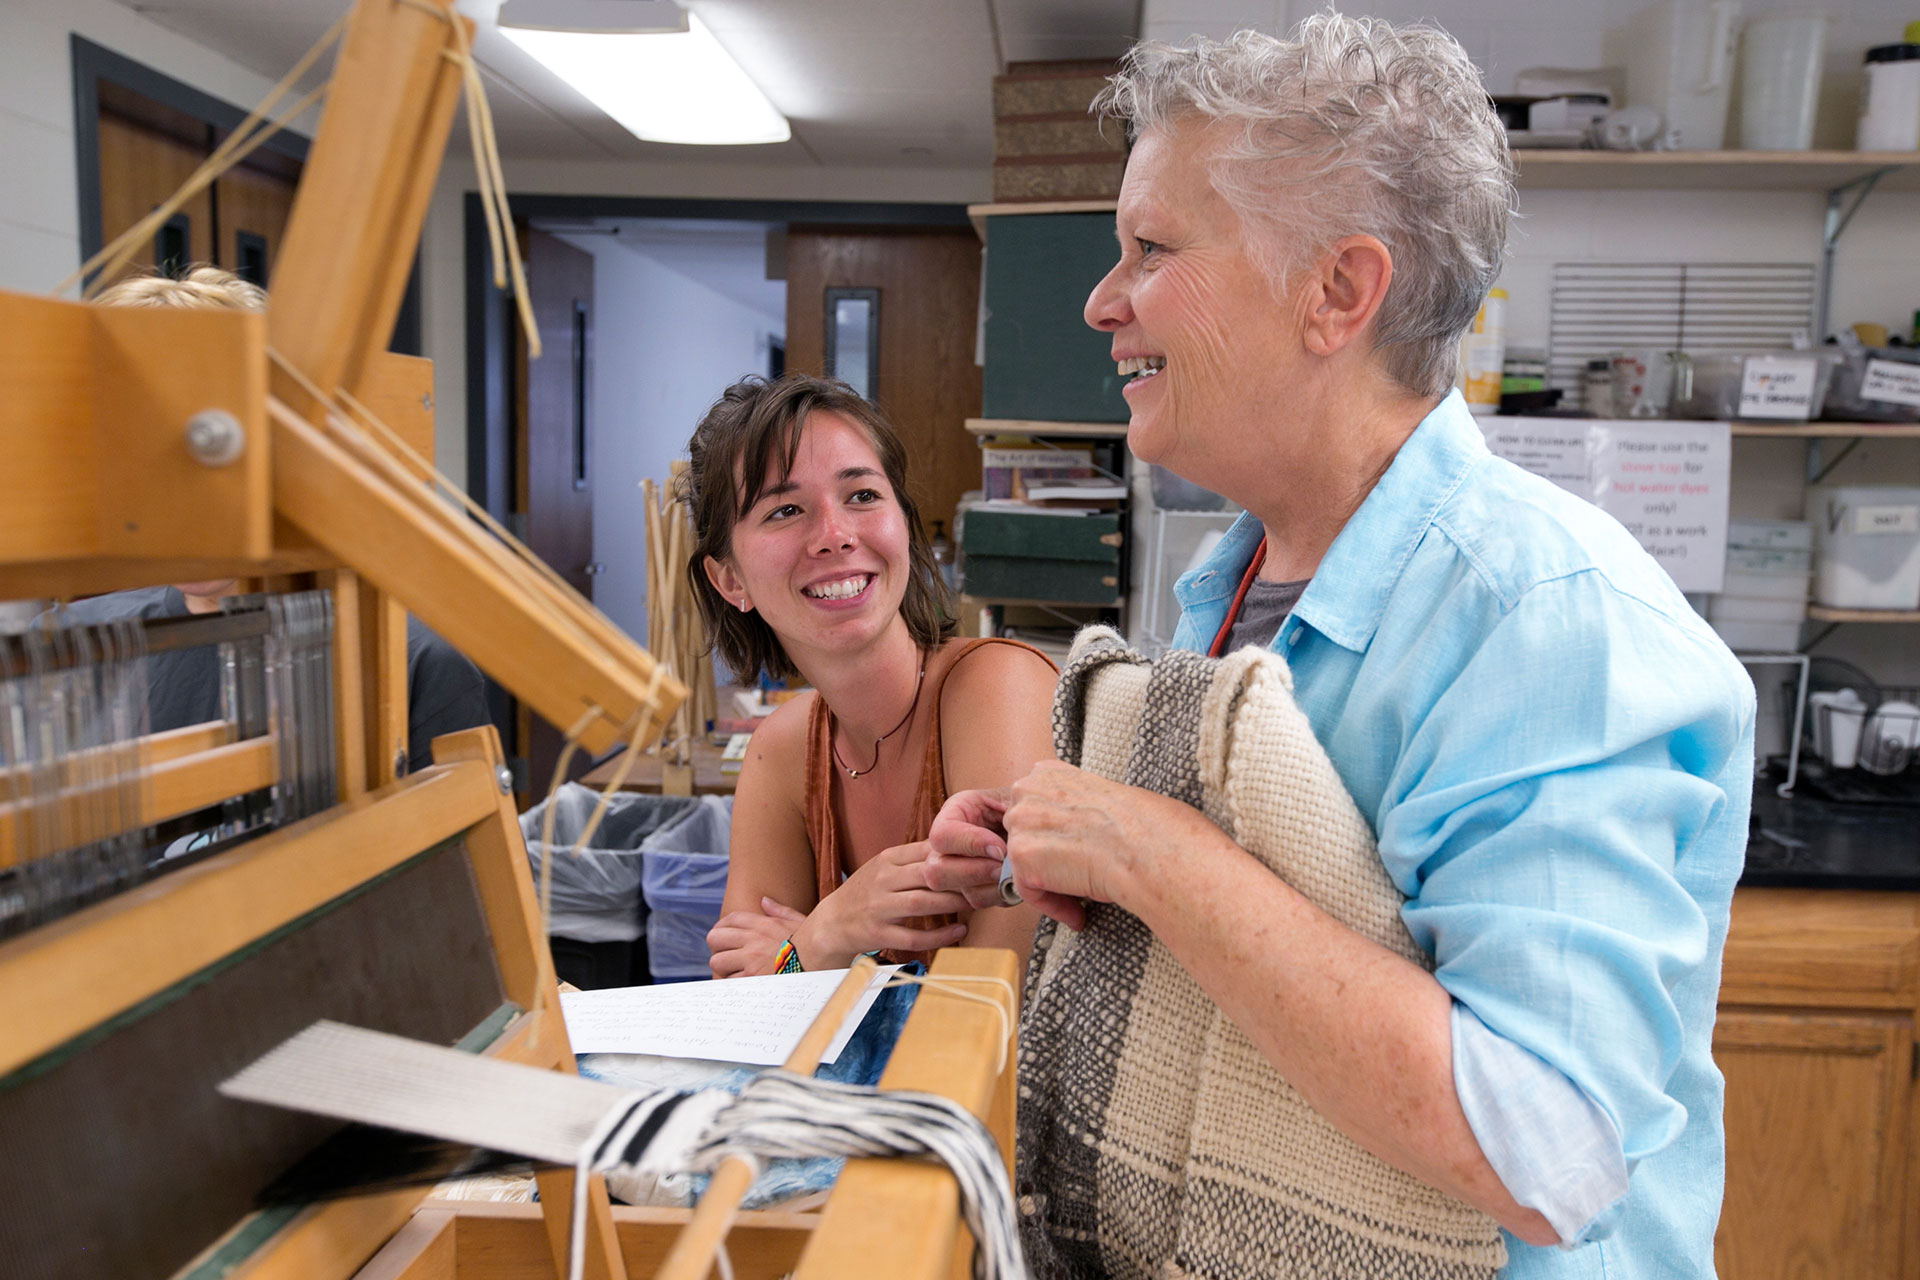 Kai Hill '18 speaks with Fiber Instructor Jeanne Stiener about her double-weaved jacket created when she was a student after a loom demonstration on how to double weave yarns.